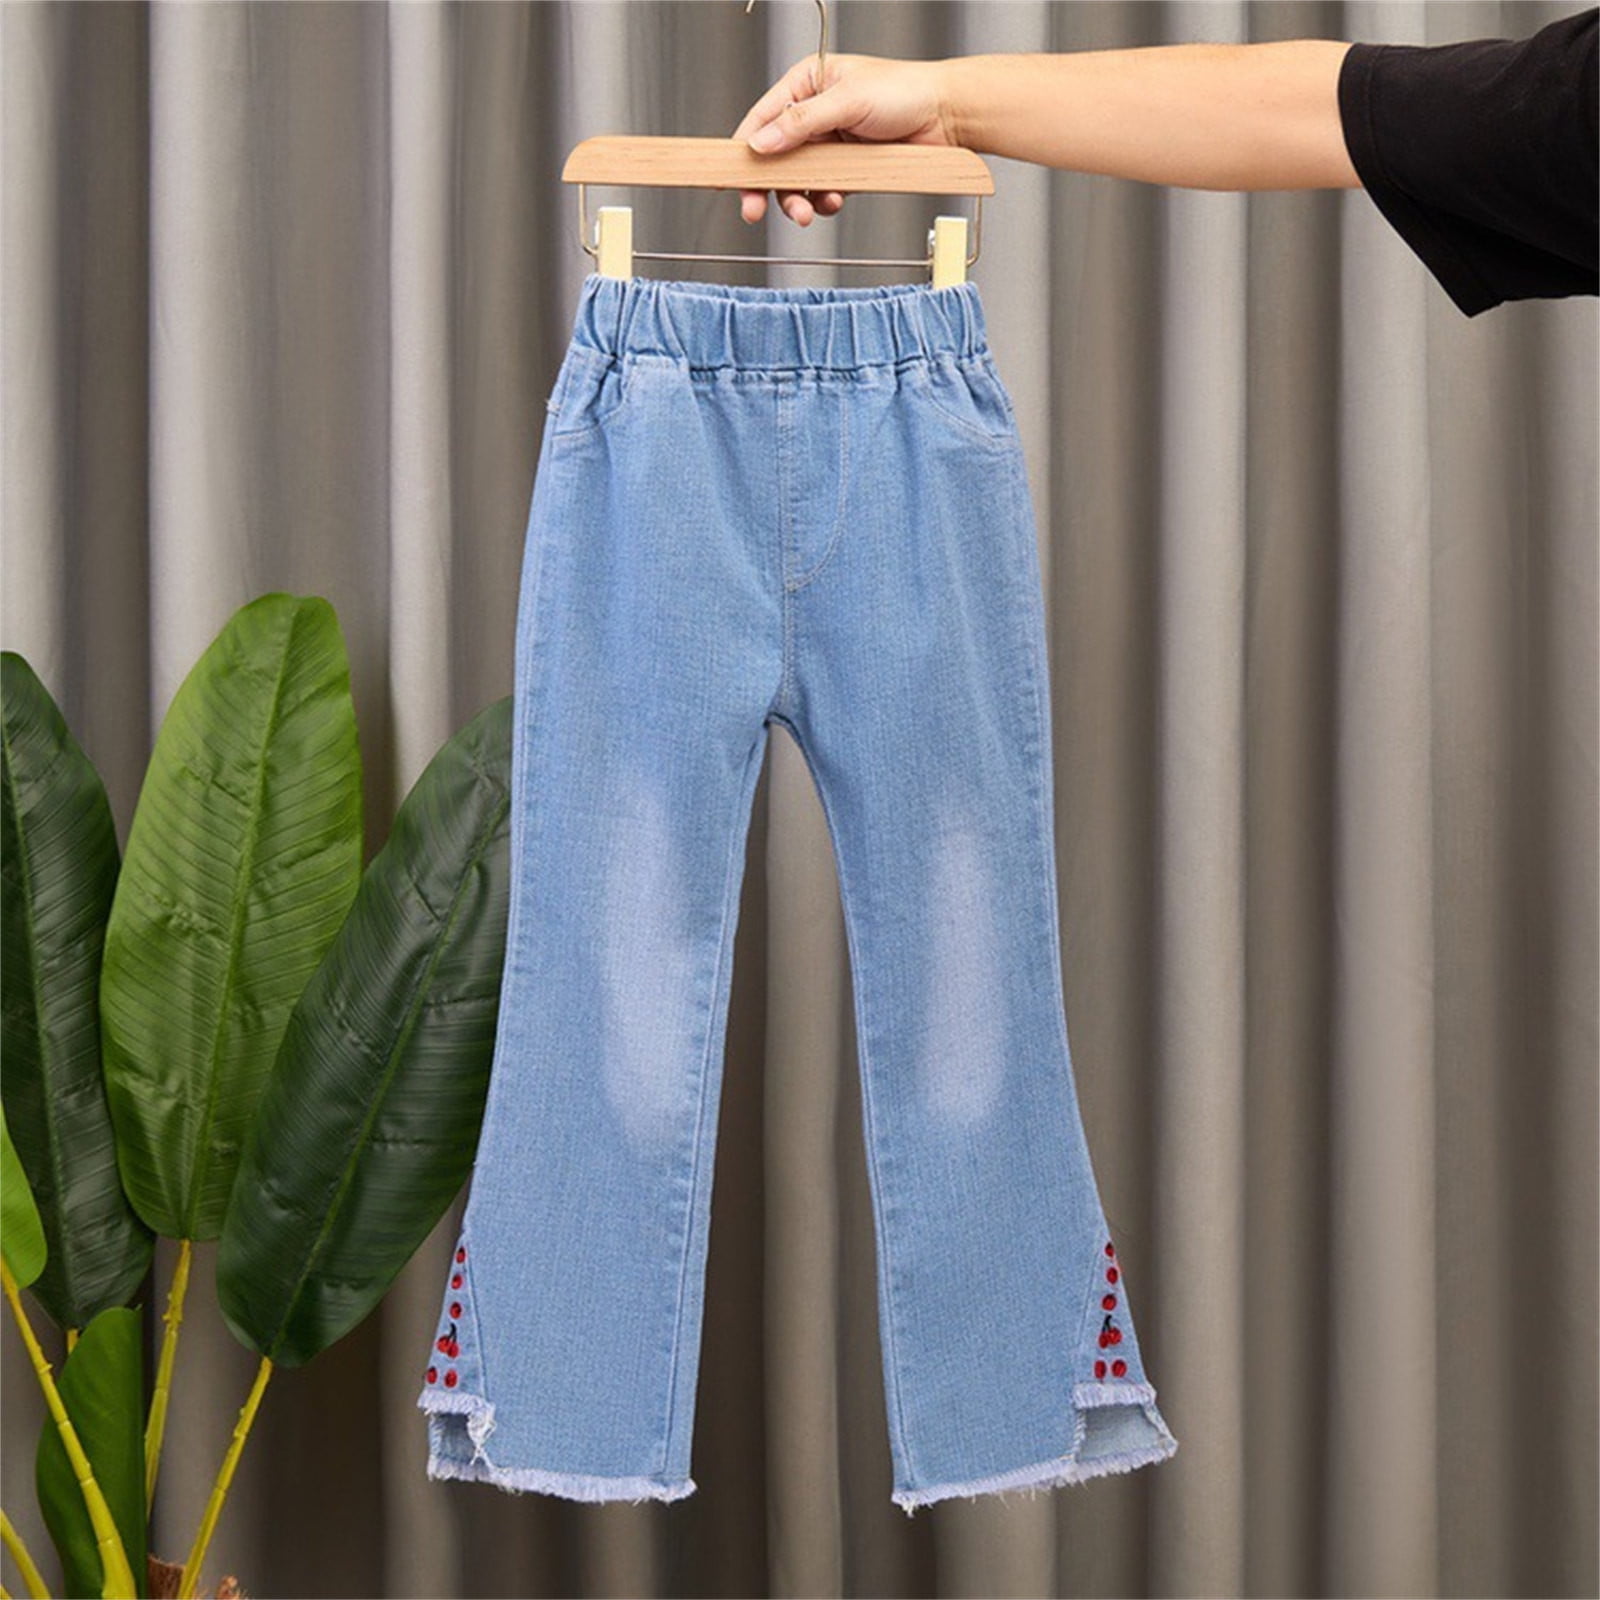 Baby Delas!2-13 for Jeans Jeans,Girls Jeans Flare Wide Girls Girls,Flare Jeans Pants,Bootcut Girls,Toddler Flared Jeans,Girls Bootcut Flare Years Girls,Toddler Baggy Jeans Leg